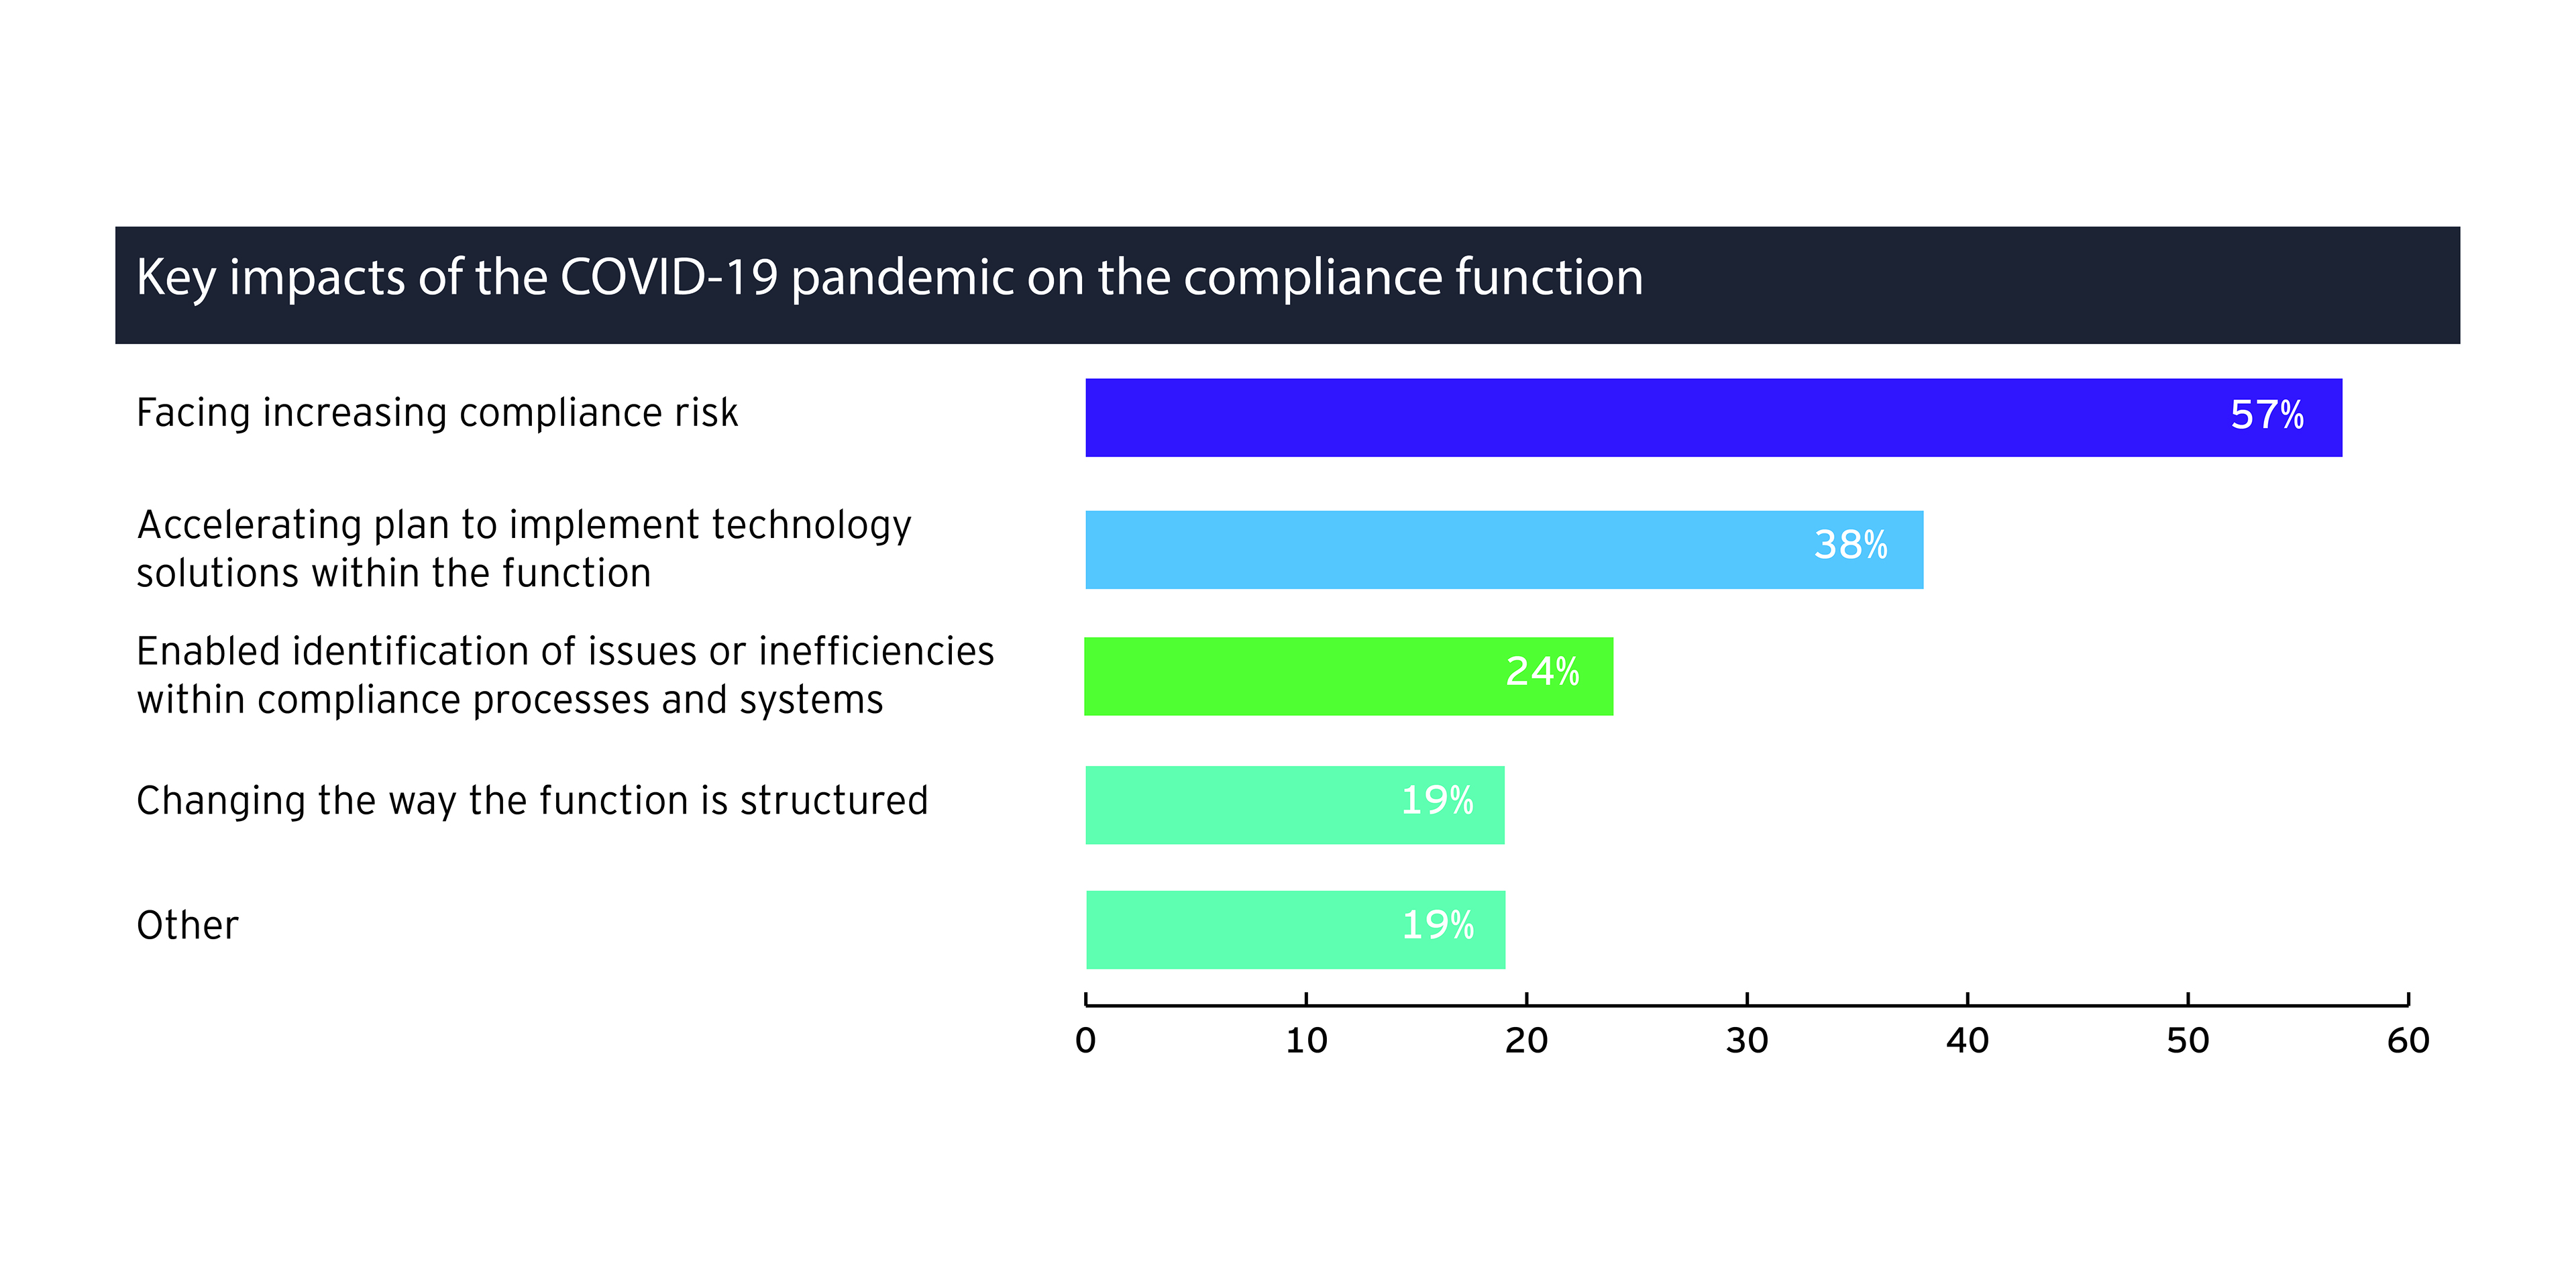 Key impacts of COVID-19 pandemic on the compliance function